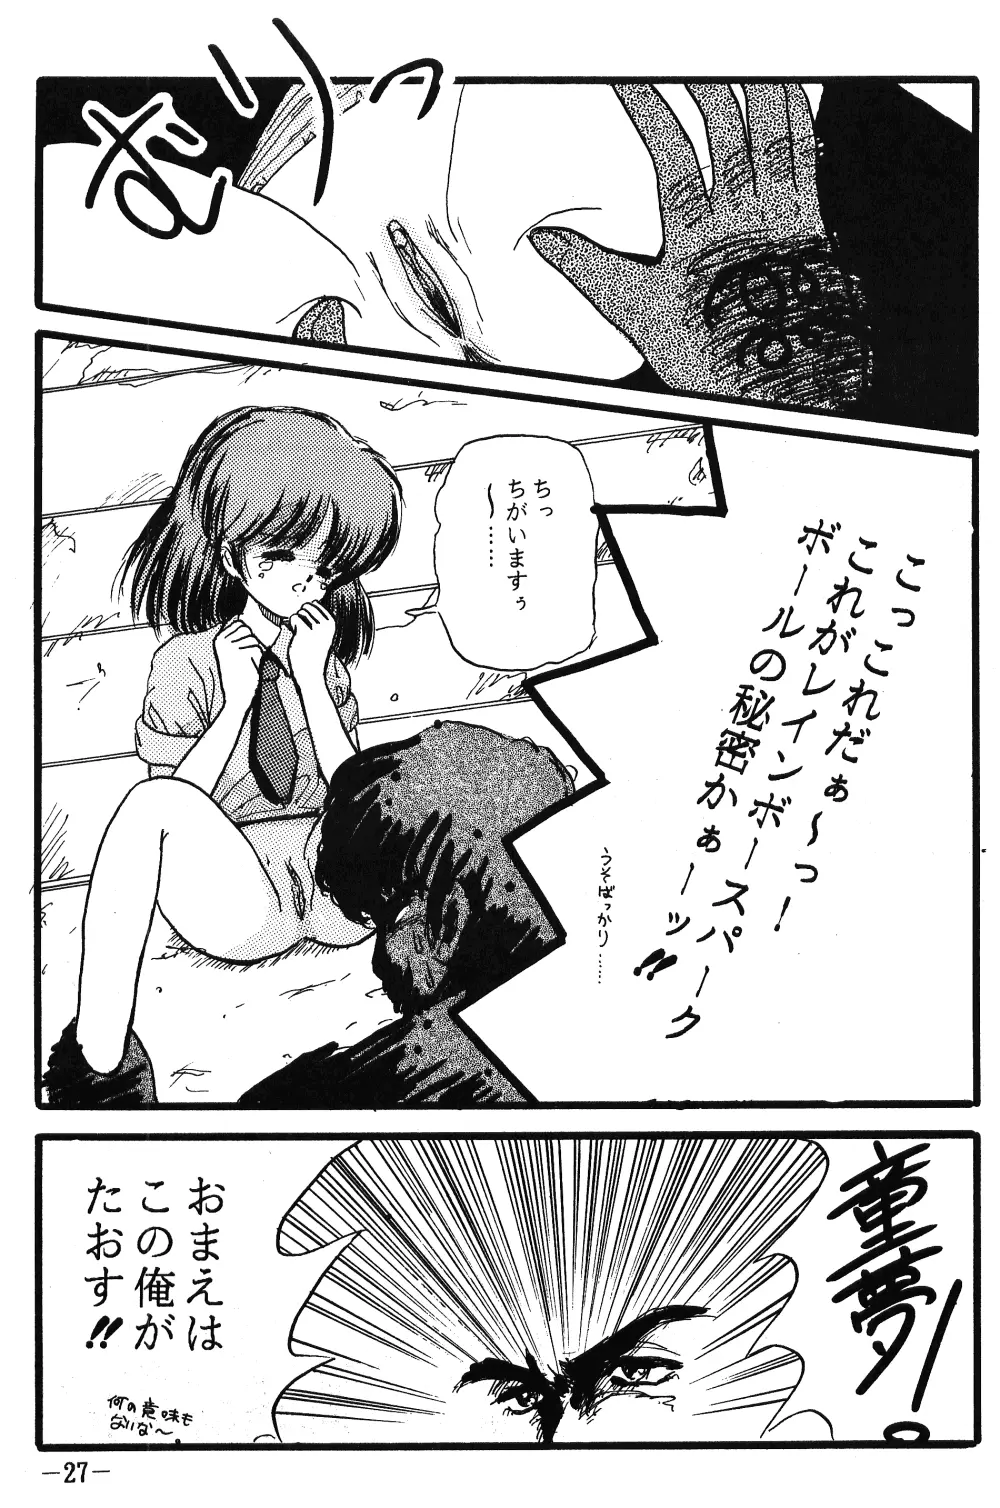 Fro2 Fight Vol. 1 Page.27